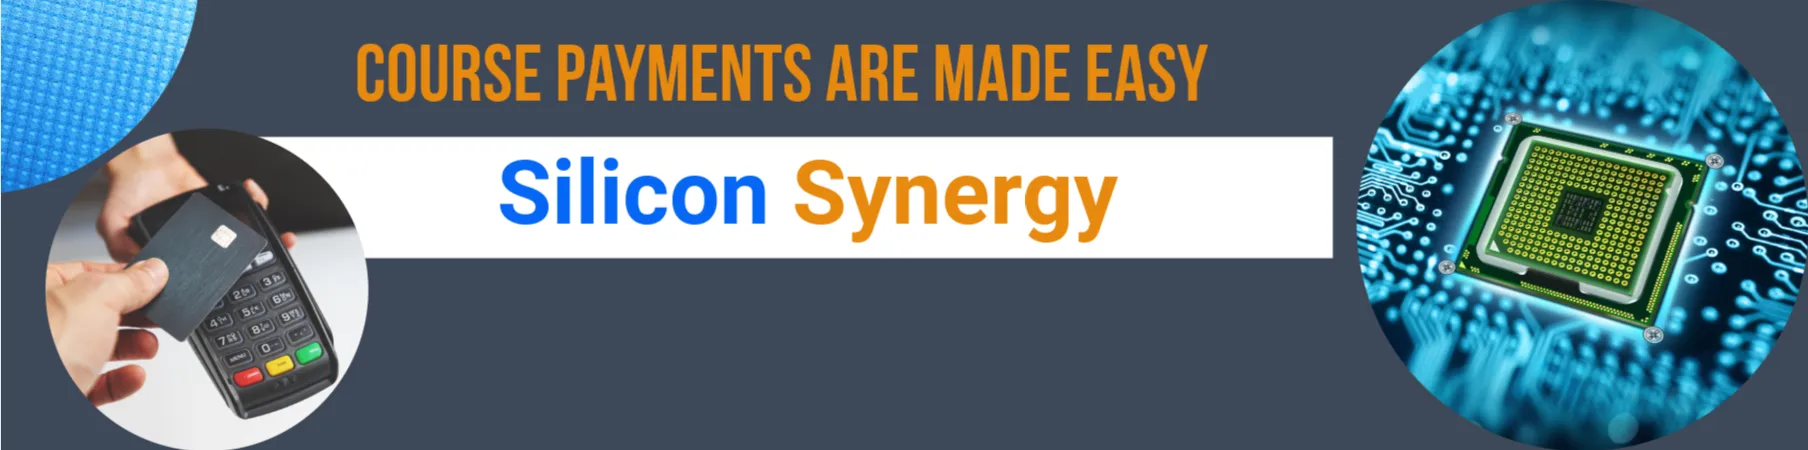 Course-Payments-Silicon-Synergy